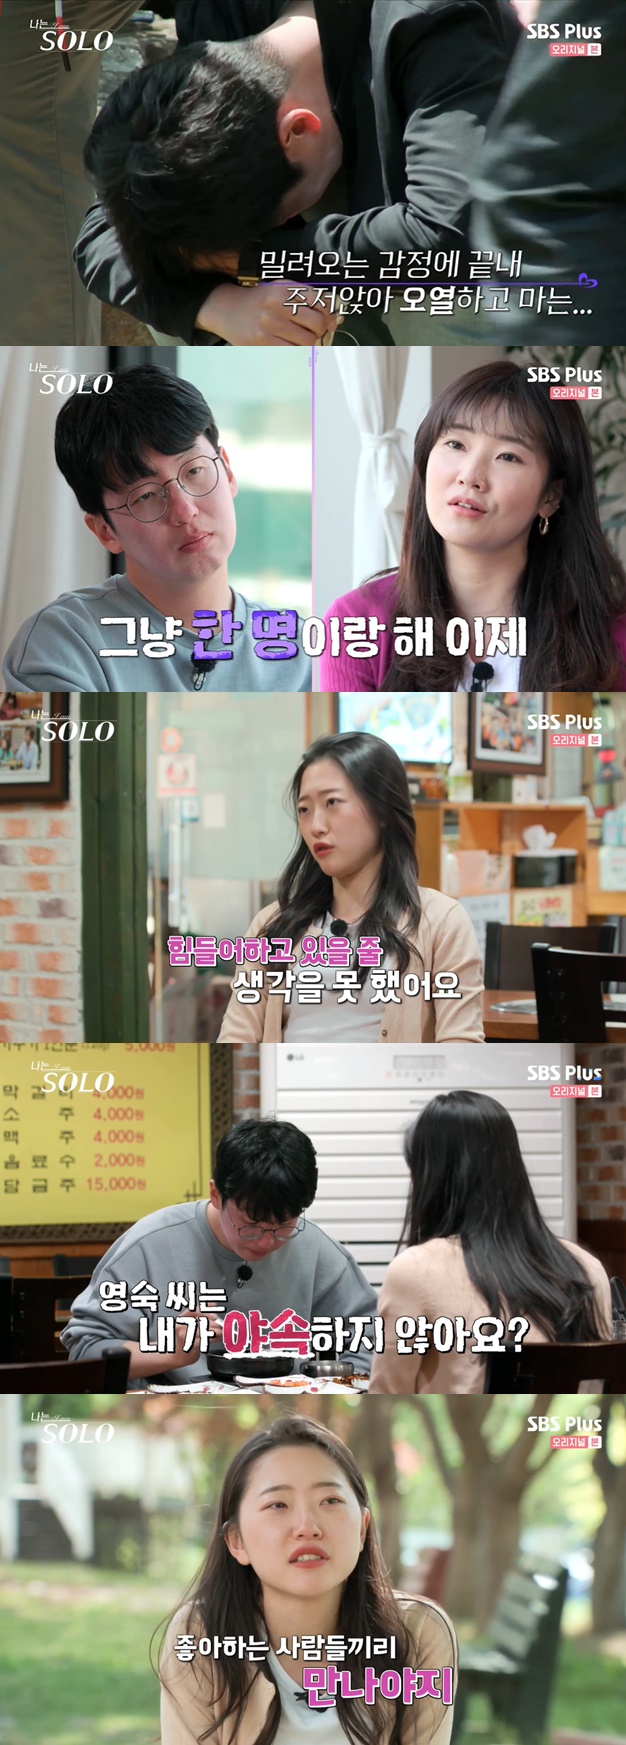 In the ENA PLAY and SBS Plus entertainment program Im SOLO 9 (hereinafter referred to as I Solo) broadcast on the 17th, the final Choices of 12 Solo men and women were drawn.On this day, Young Sook said, I like Kwangsoo, and Kwangsoo seems to like Oksun ... it is uncomfortable.I would have avoided it if it was not Solo Country, but it was frustrating because I could not avoid it, he said. I wanted to run away.A final proposal to convey his mind ahead of the final Choices followed: Kwangsoo sang Young-sook, I laughed so much thanks to you, he cried.Kwangsoo then called Oksun and said, I cried a lot because of you.He sobbed, Im sorry I didnt give you two the confidence, I think I did it because of my anxiety, but Ill do the best Choices in the final Choices.Respect my Choices. I respect your Choices, too. Thank you both. He went back to his seat and sat down.After that, he told Kwangsoo, What are you doing? He said, Now just do it with one person.Ok Soon then declared, I will be wearing a white one piece today, pick a person wearing a white one piece, but Kwangsoo avoided answering.After Oksun and Date, Kwangsoo met Youngsuk. When Kwangsoo asked, Why did you cry? Youngsuk expressed concern, saying, I did not know it would be so hard.Young Sook then asked Kwangsoo about the reason for his misery.Kwangsoo said, I have two memories. He said that he remembered the happy memory of jogging with Young Sook, and the memory of suffering from Oksun.I am glad if I was happy, Young-sook said. I hope it will be too hard.I do not think Im a bitch, said Kwangsoo. I think its all wild, but I think its all right.When Kwangsoo said, I am very grateful to you for thinking about other peoples position, Young Sook said, What I like is my heart.It is my way to use my mind until my heart is done, until it is gone, he said.If you like me, I would have felt it, he said later in an interview with the production team, I think I heard (Kwangsoos) answer: you have to meet people you like.I hope I meet well. Then Young Sook finally made the Choices for Kwangsoo. Oksun also gave his heart to Kwangsoo.With everyones attention focused on Choices in Kwangsoo, Kwangsoo delivered his name to Youngsuk; Youngsuk poured tears into Kwangsoo, who had Choices himself.Young-sook was hurt by me, but when he saw me crying, he counted my pain. I wanted to be a mature person.I thought I was young but mature. But the reaction from viewers was chilly: netizens the process is so ridiculous, rude, and why did you give me the room for Choices at the last Date?I make it look forward to the end and trample it brutally. He applauded Kwangsoo for cider .It was the moment when Ok Soon, who suffered from evil words saying McMorning Billon at the beginning of the broadcast, emerged as the main character.Photo = SBS Plus broadcast screen